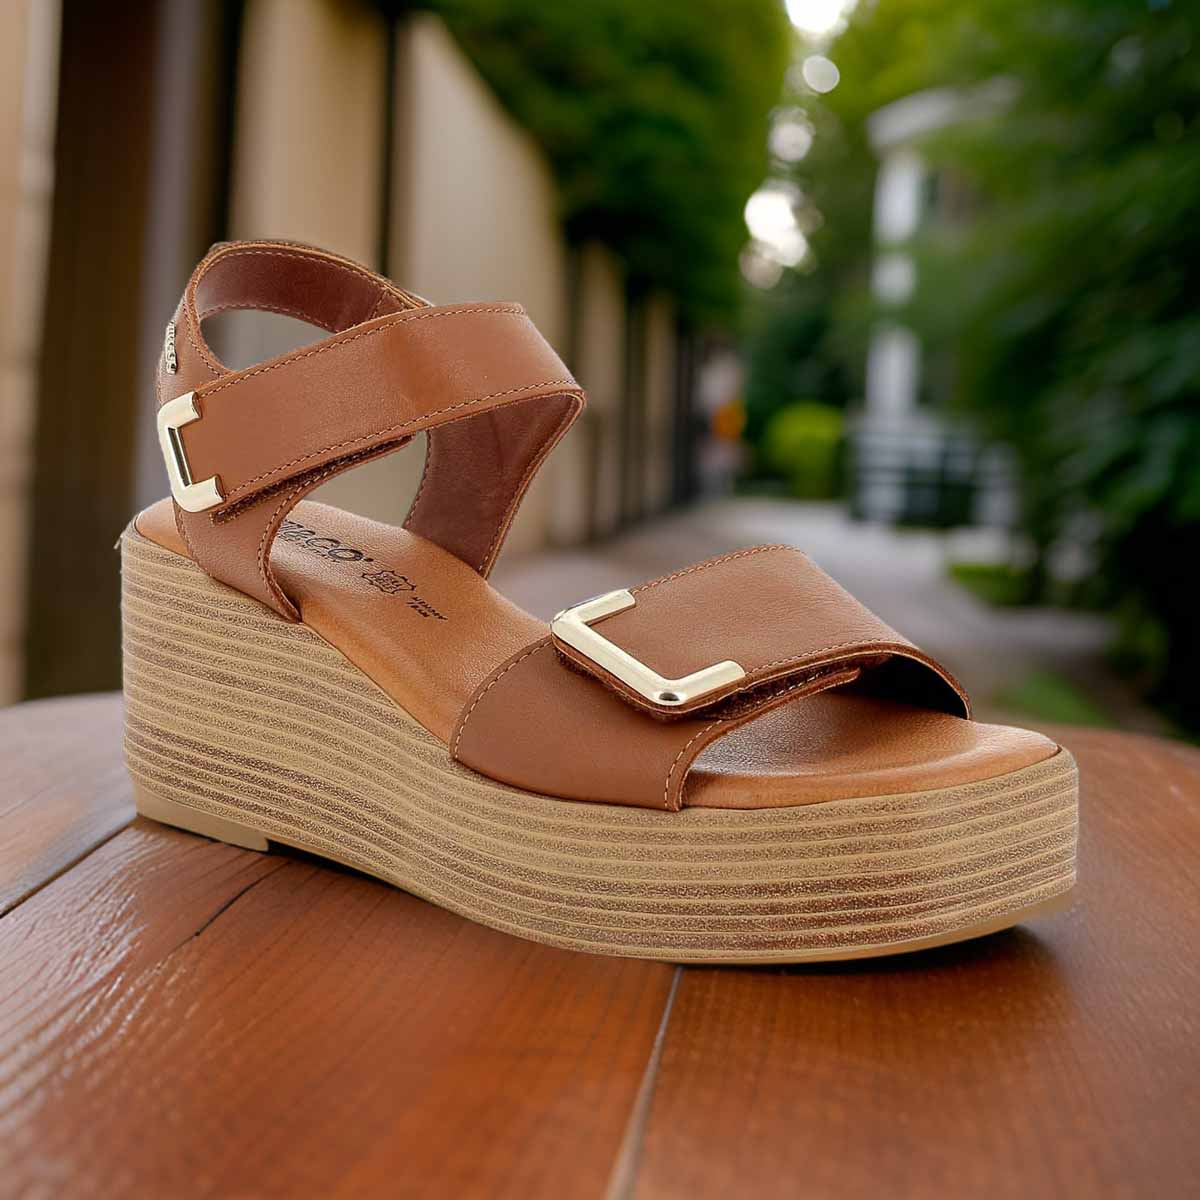 IGI & Co Luxury Brown Wedge Sandals with Gold-Tipped Straps